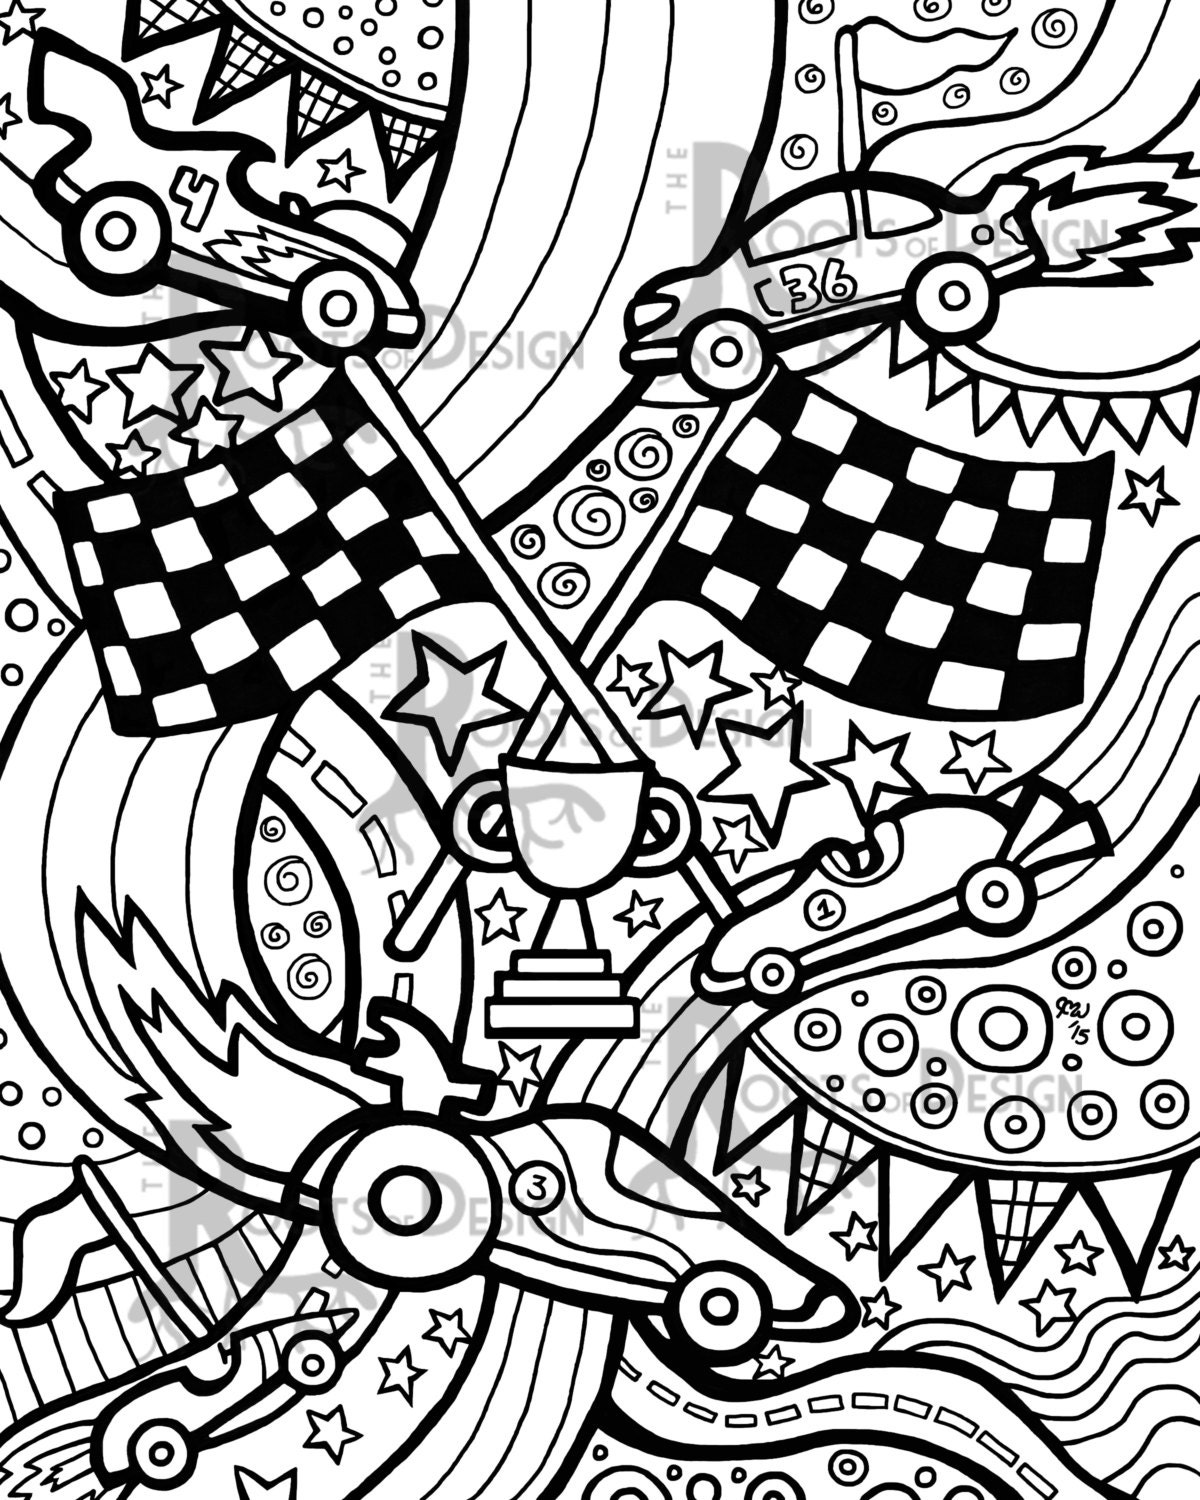 INSTANT DOWNLOAD Coloring  Page  Race Cars  zentangle inspired